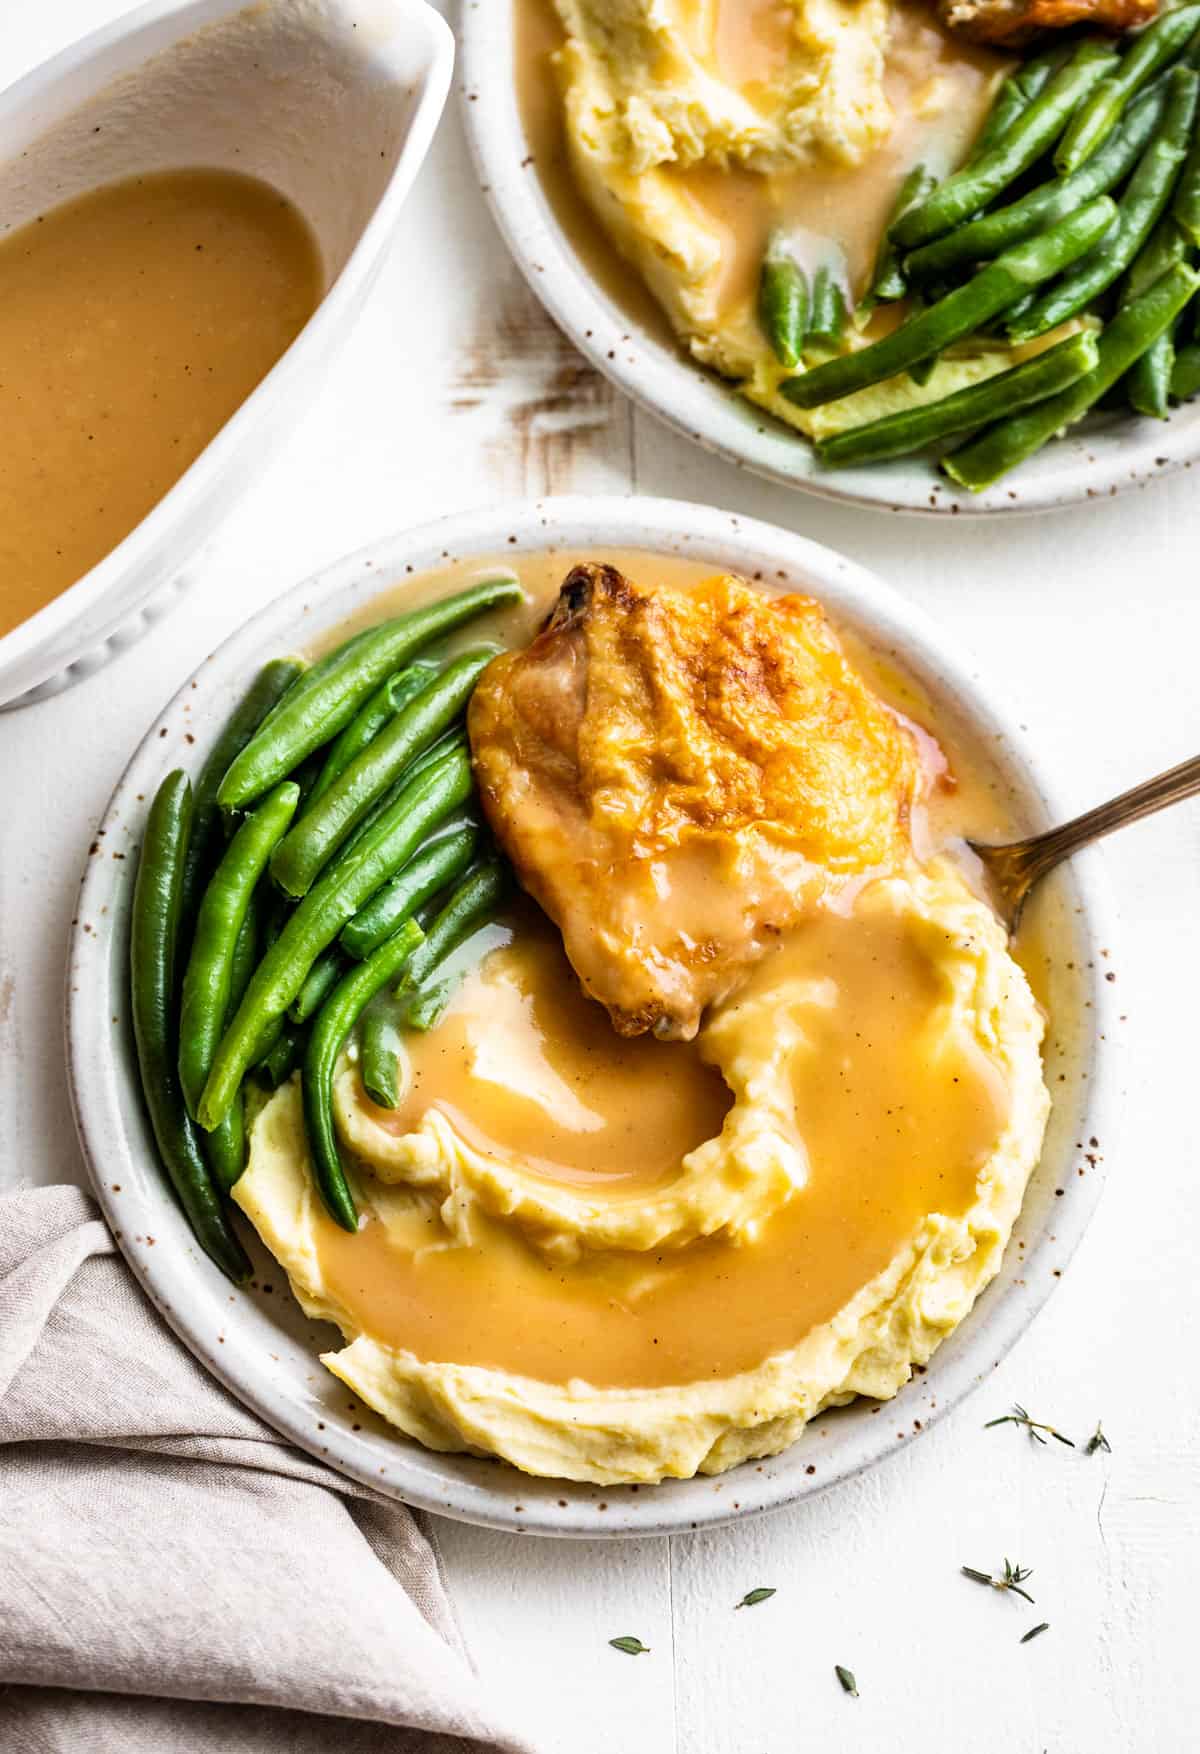 Two plates of mashed potatoes with chicken, green beans, and gravy with a gravy boat on the side.